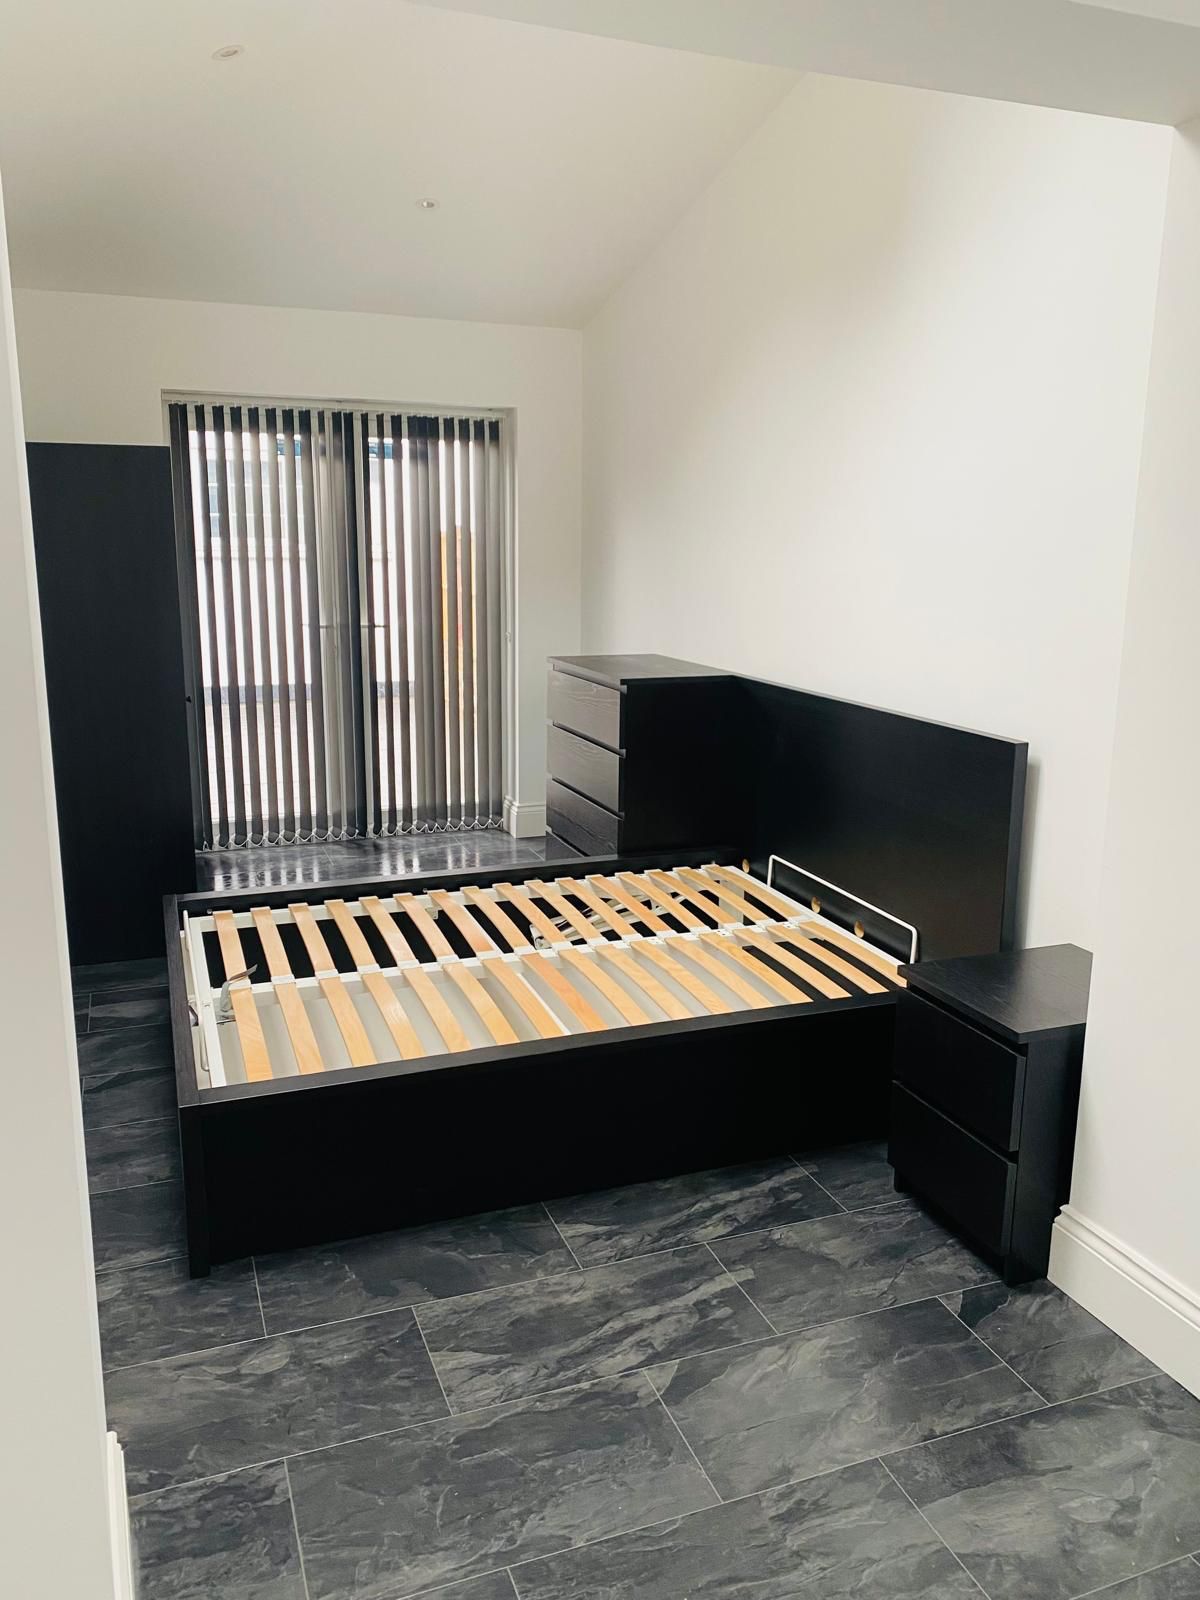 0 bed Apartment/Flat/Studio for rent in Ilford. From PropertyLoop